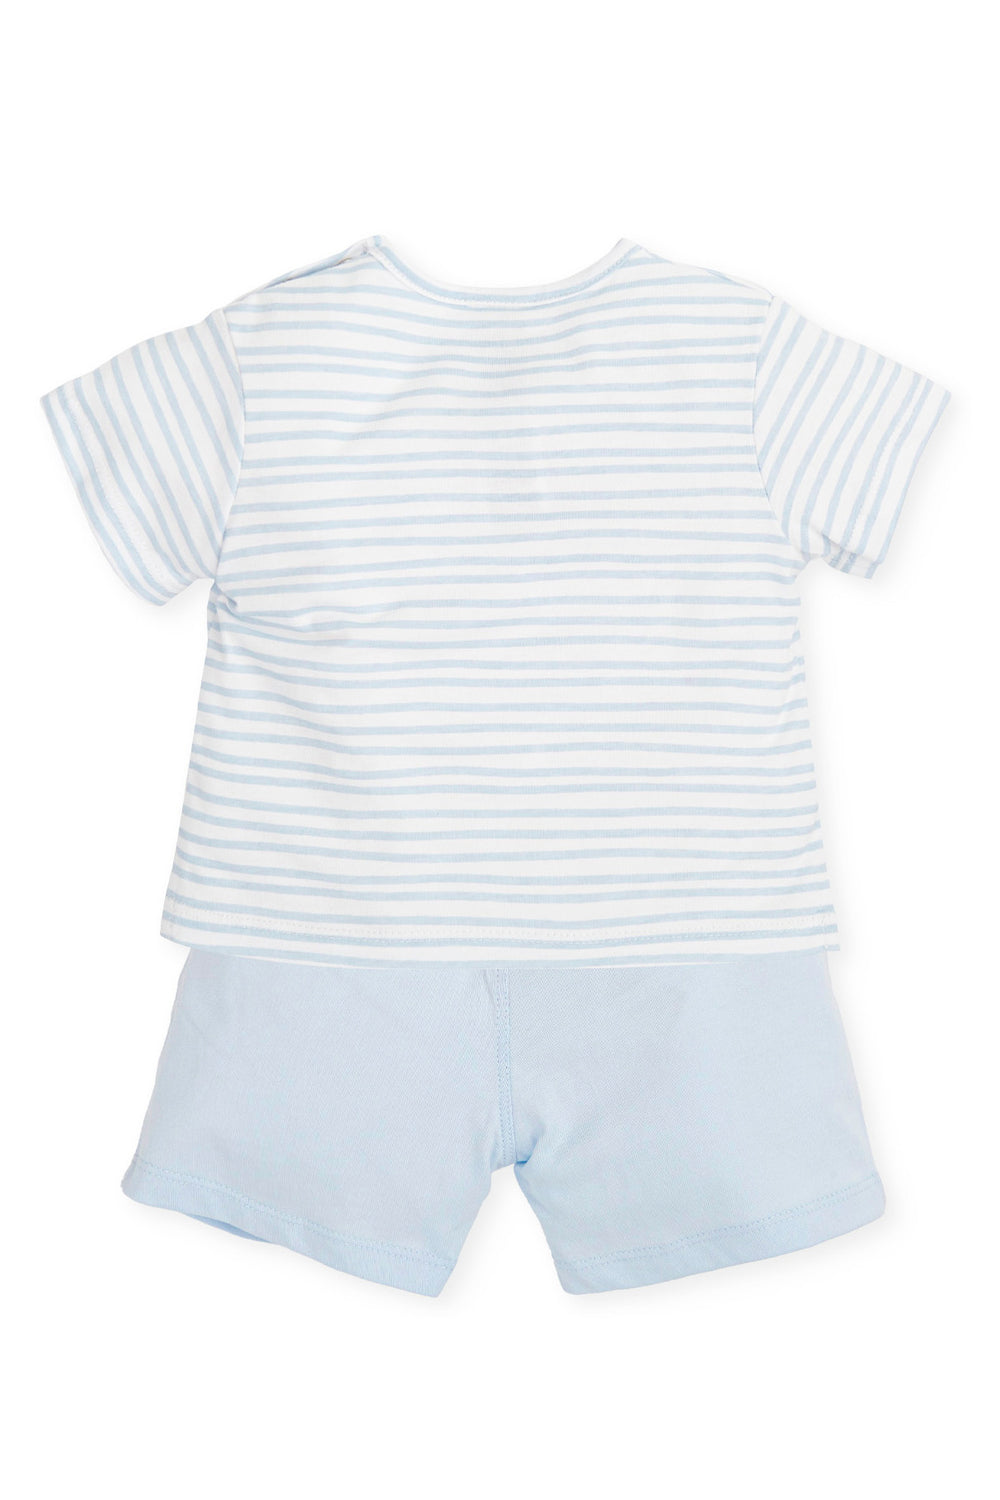 Tutto Piccolo "Casimir" Blue Stripe T-Shirt & Shorts | iphoneandroidapplications